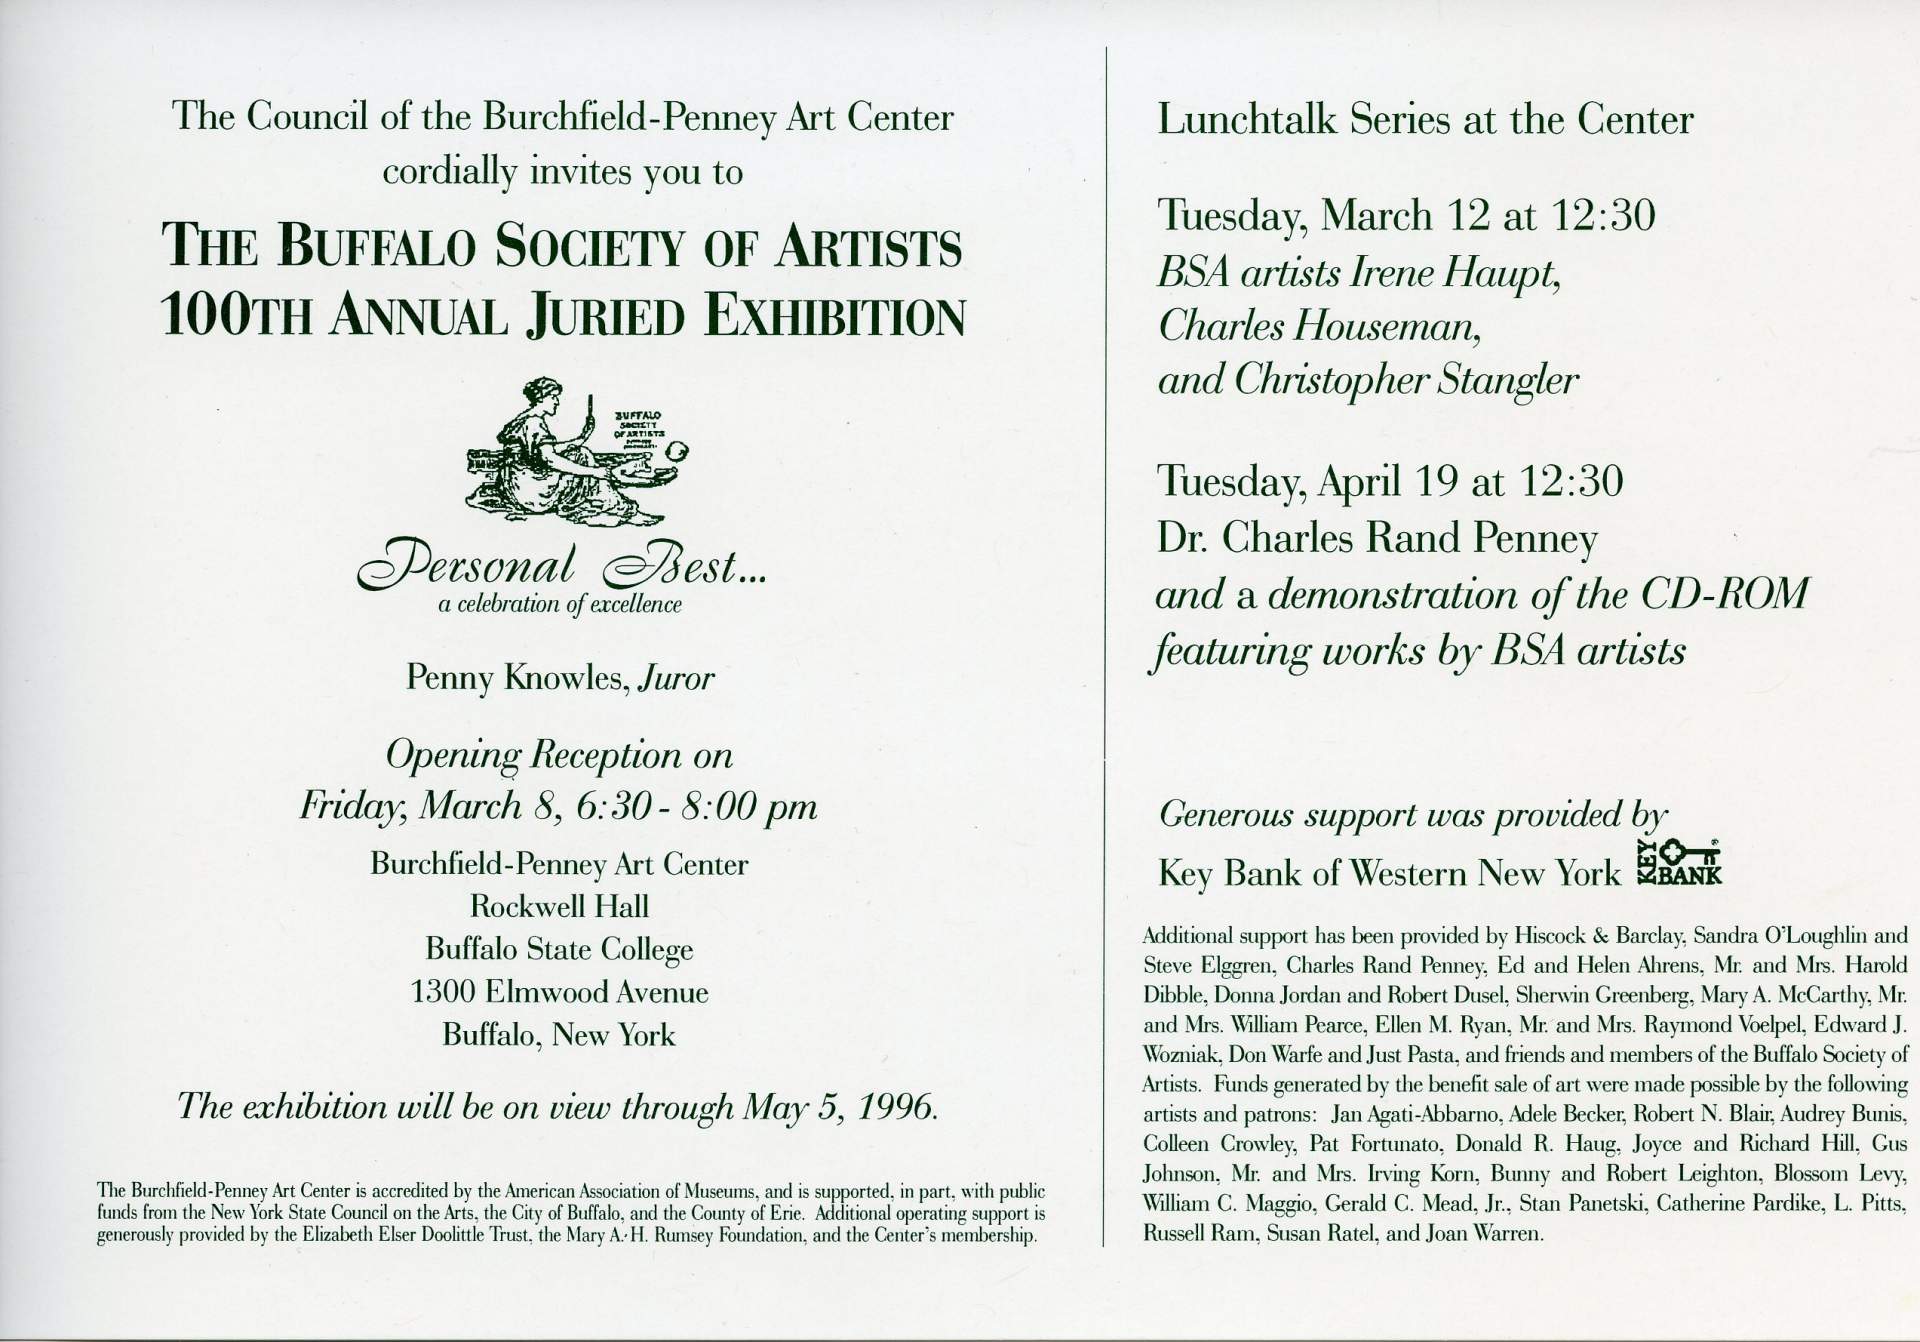 Buffalo Society of Artists 100th Annual Juried Exhibition invitation